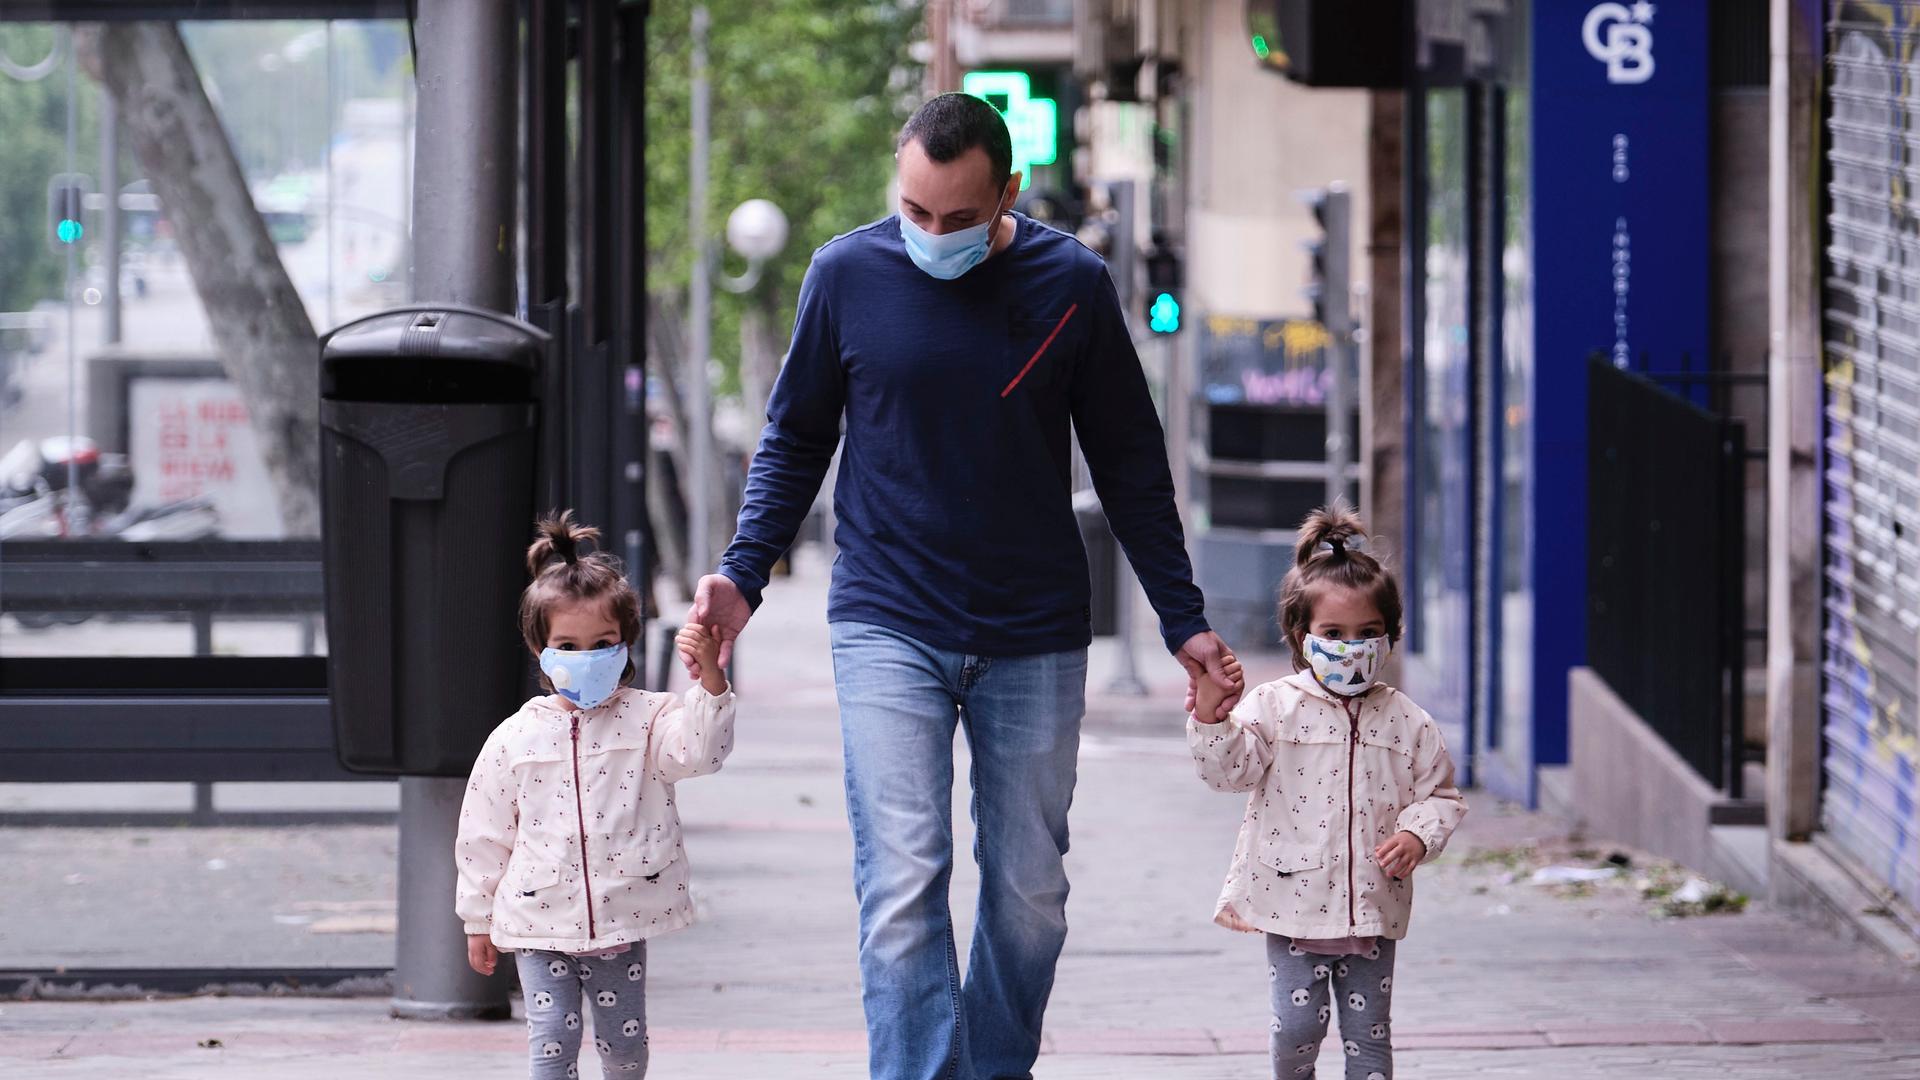 José Valdes takes his twin daughters out for a walk in Madrid on the day Spain lifts restrictions on children outdoors due to the coronavirus pandemic.